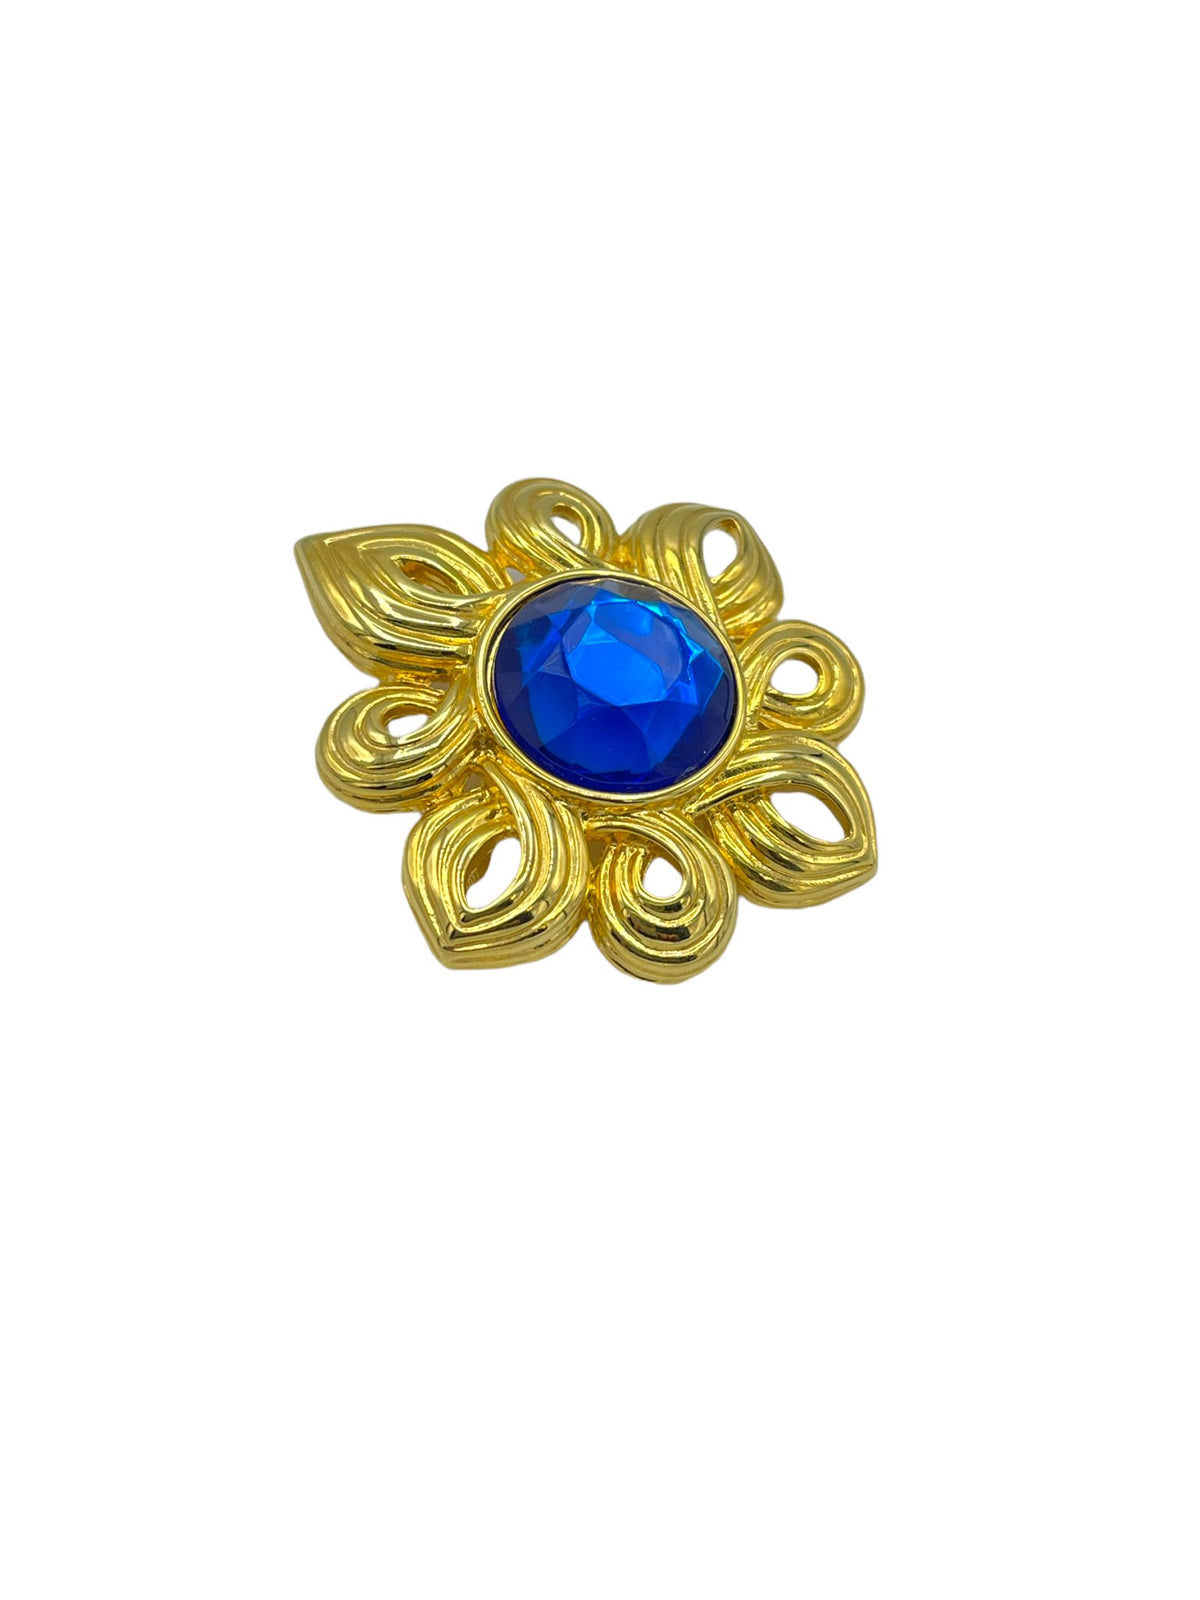 Kenneth Jay Lane Gold Scroll with Blue Rhinestone Pendant Brooch - 24 Wishes Vintage Jewelry